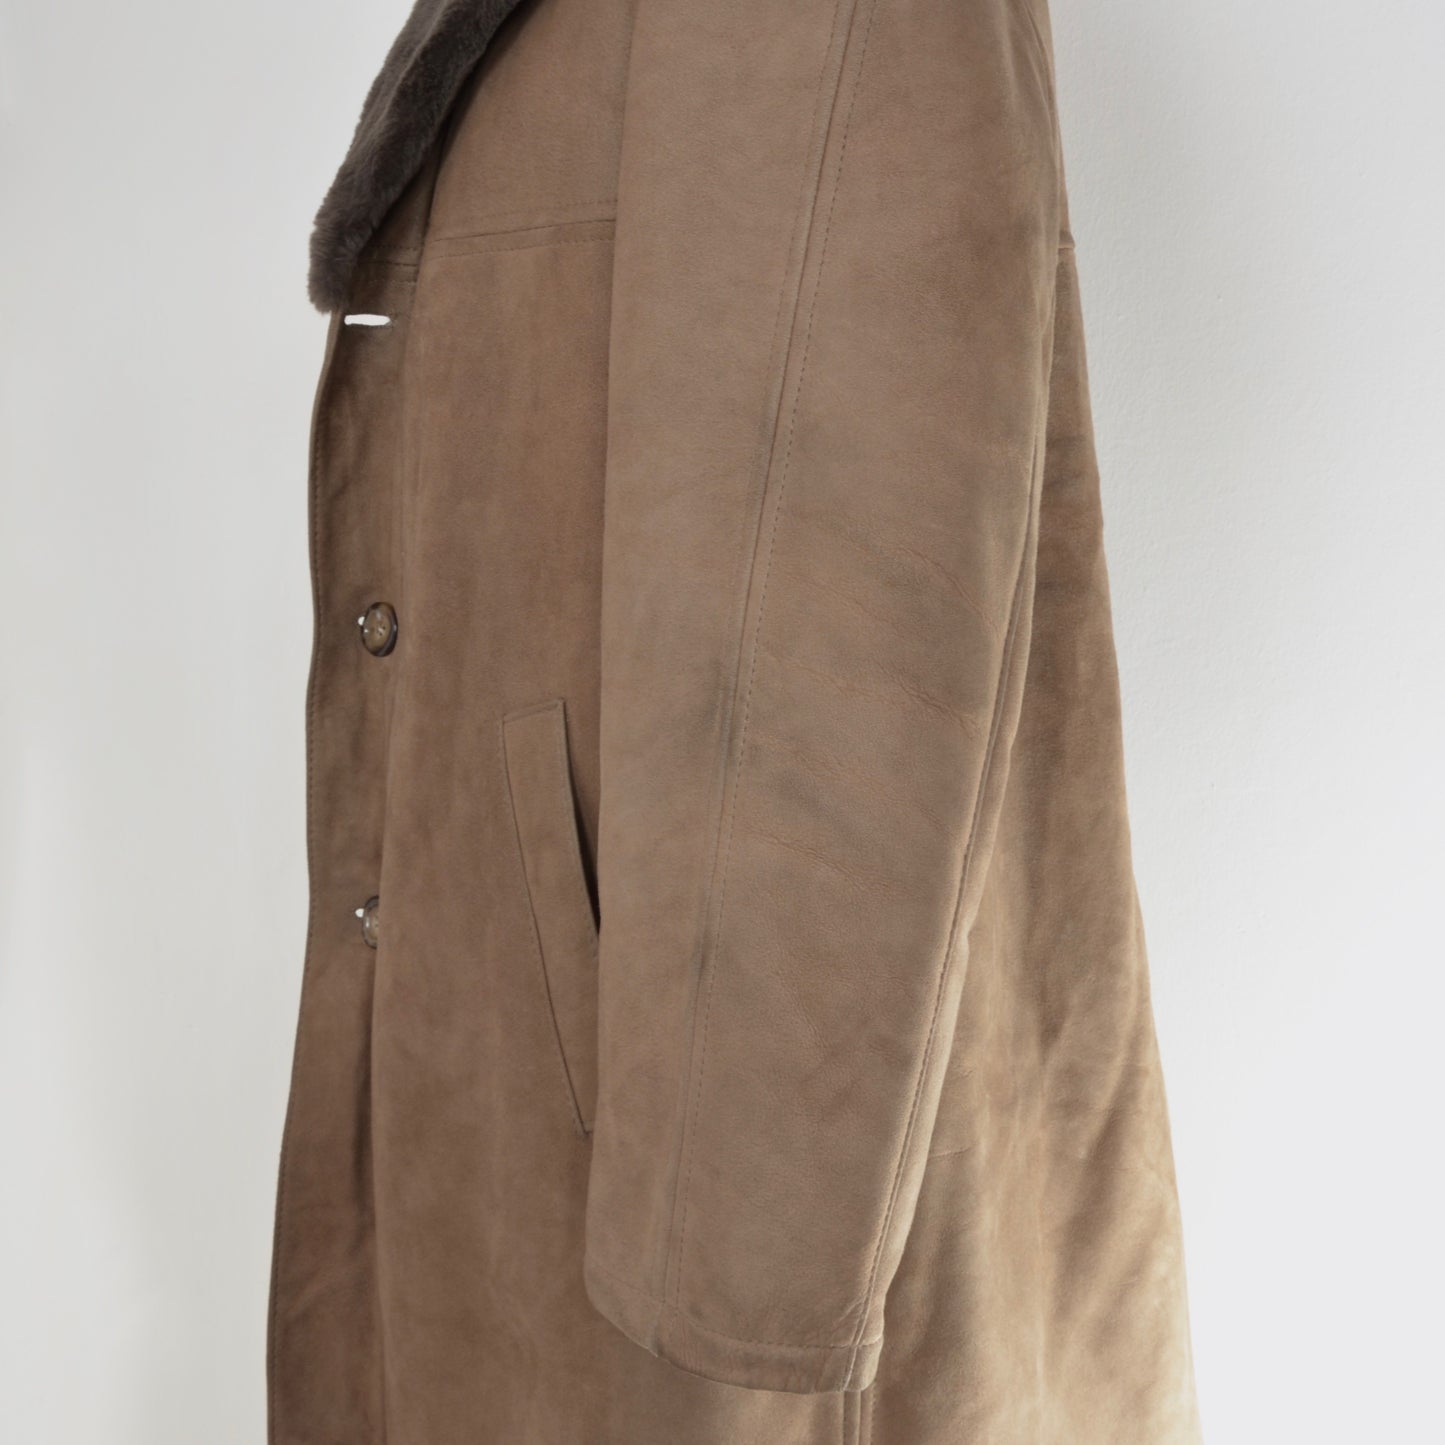 Shearling Coat Size 56 - Brown-Taupe